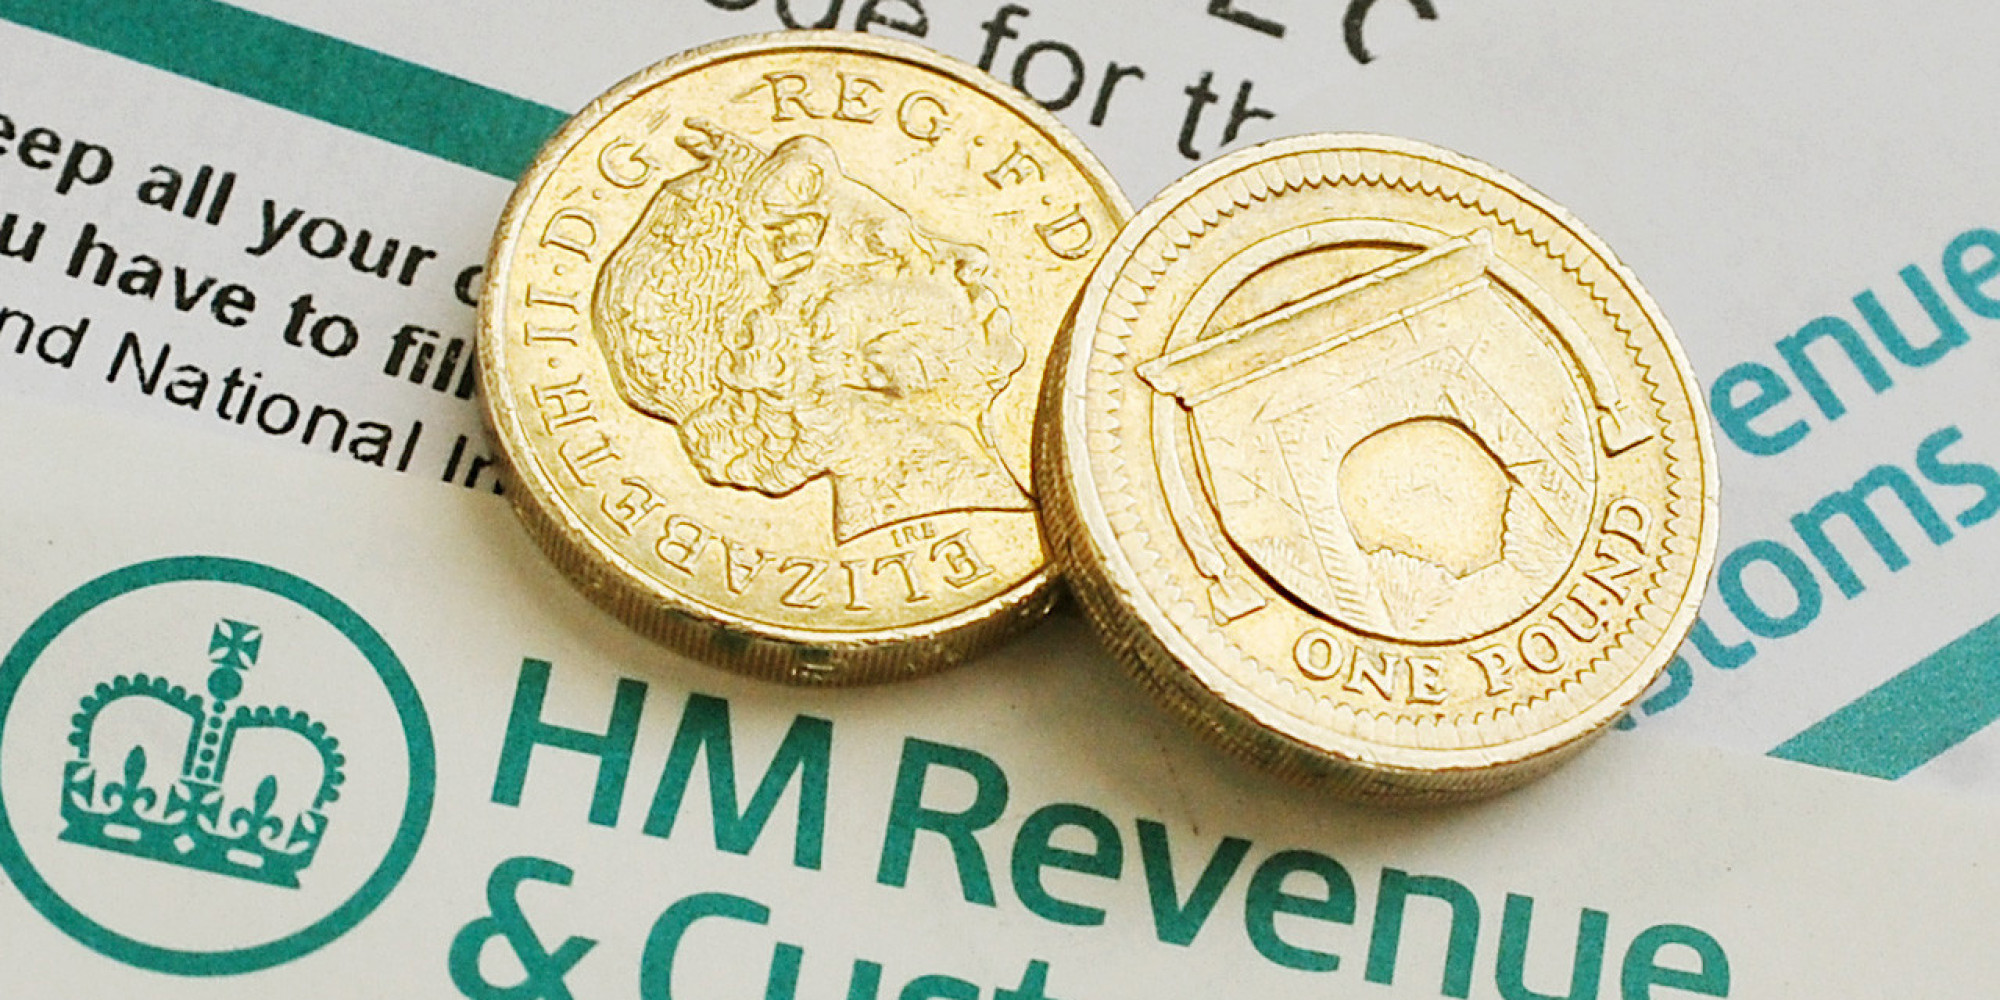 hmrc-to-sell-taxpayers-financial-data-to-private-companies-huffpost-uk